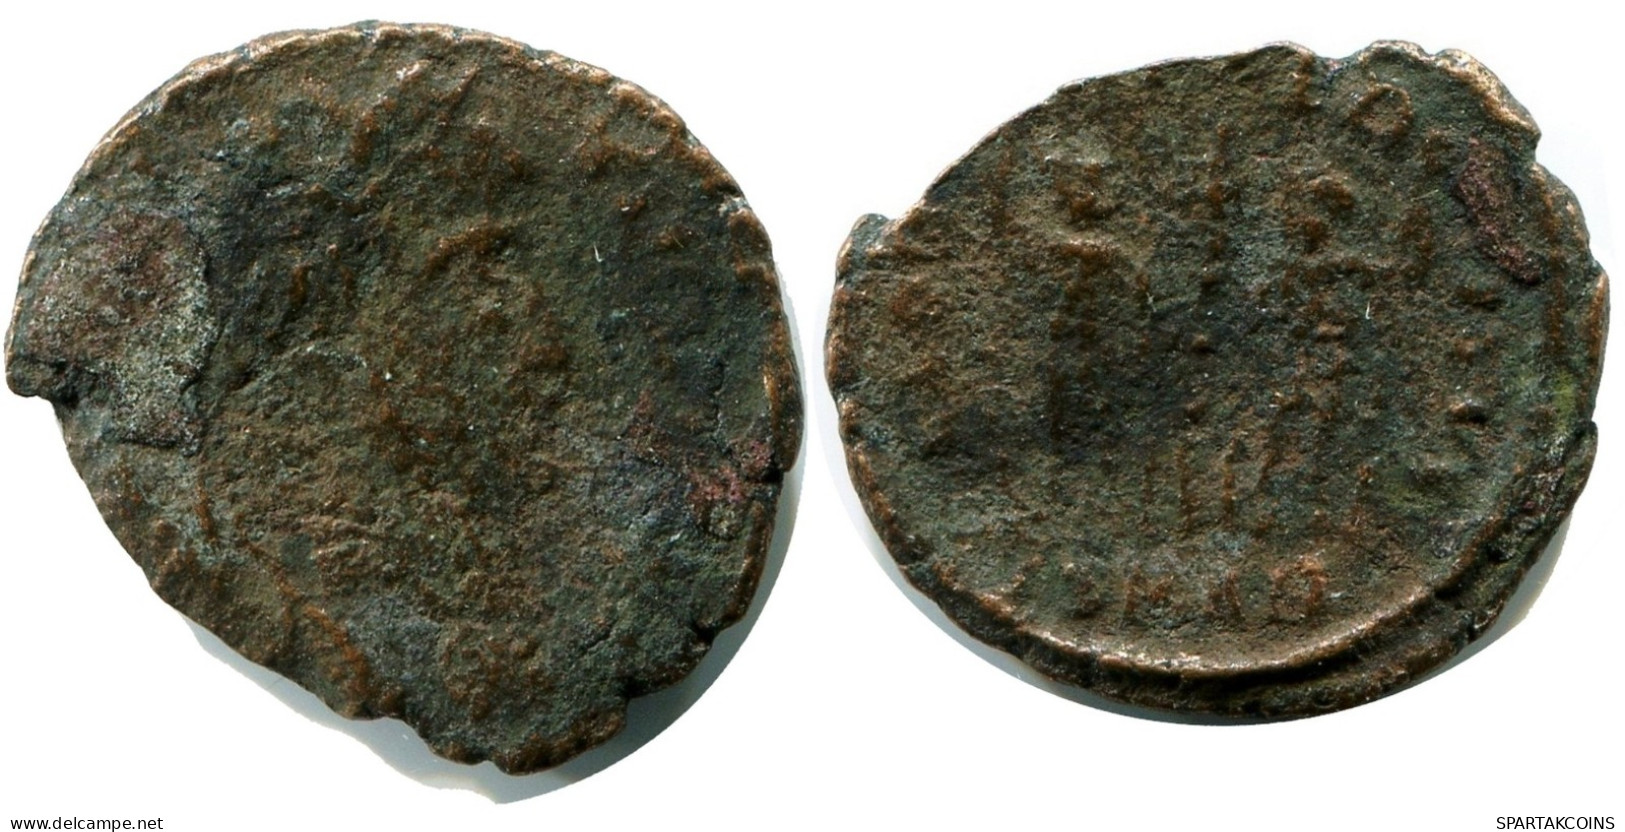 ROMAN Coin MINTED IN ANTIOCH FOUND IN IHNASYAH HOARD EGYPT #ANC11294.14.D.A - The Christian Empire (307 AD Tot 363 AD)